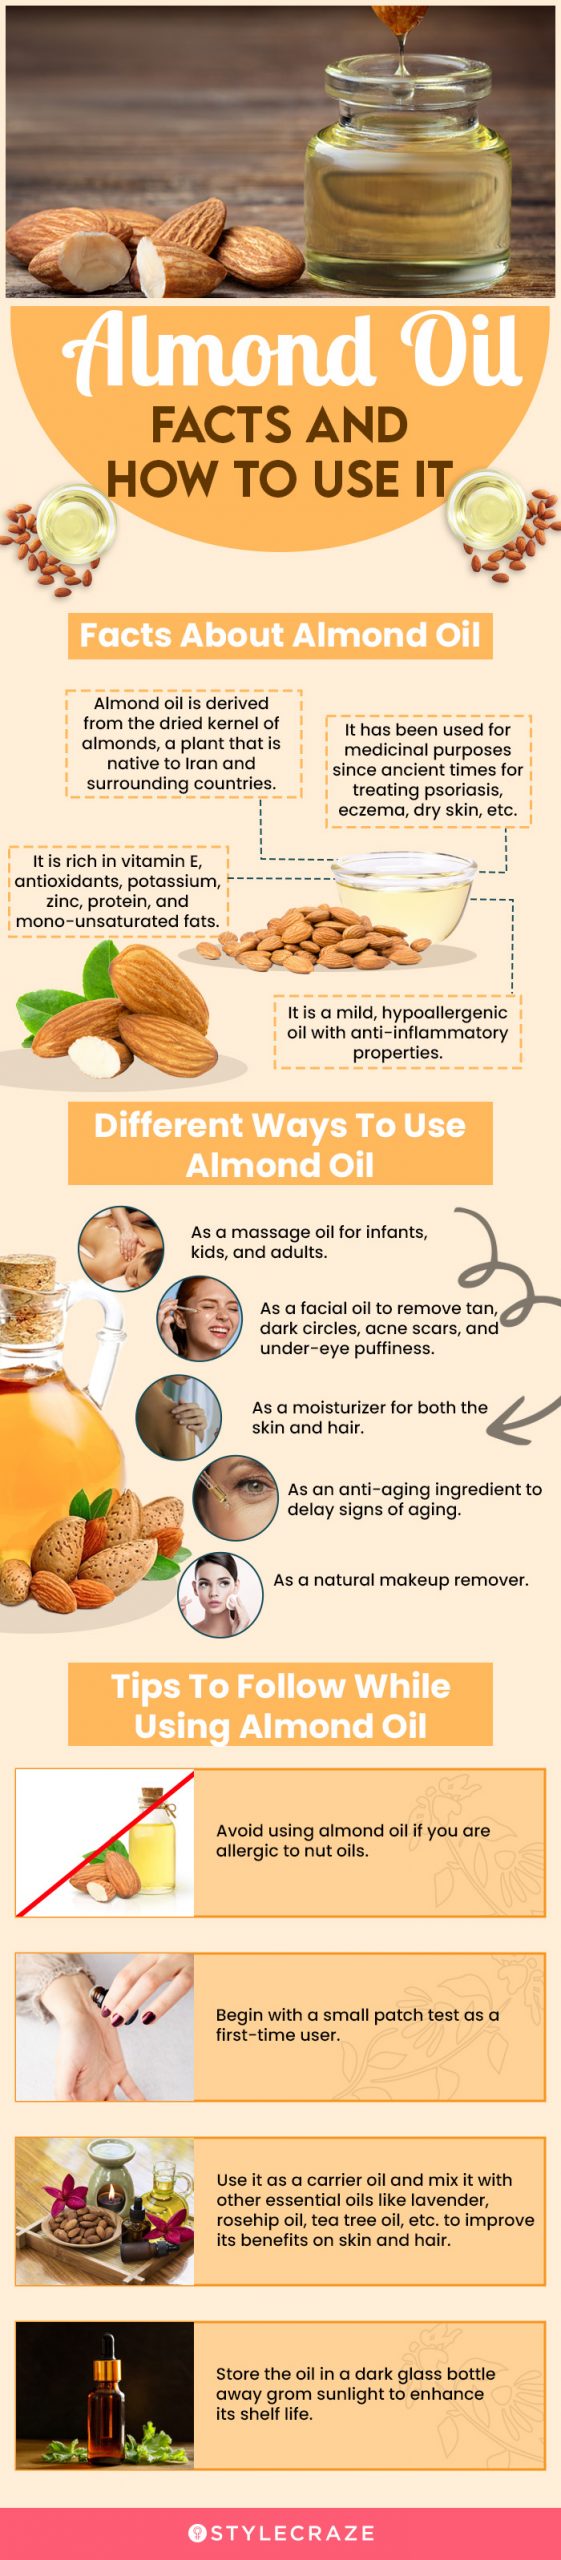 Almond Oil: Facts And How To Use It (infographic)